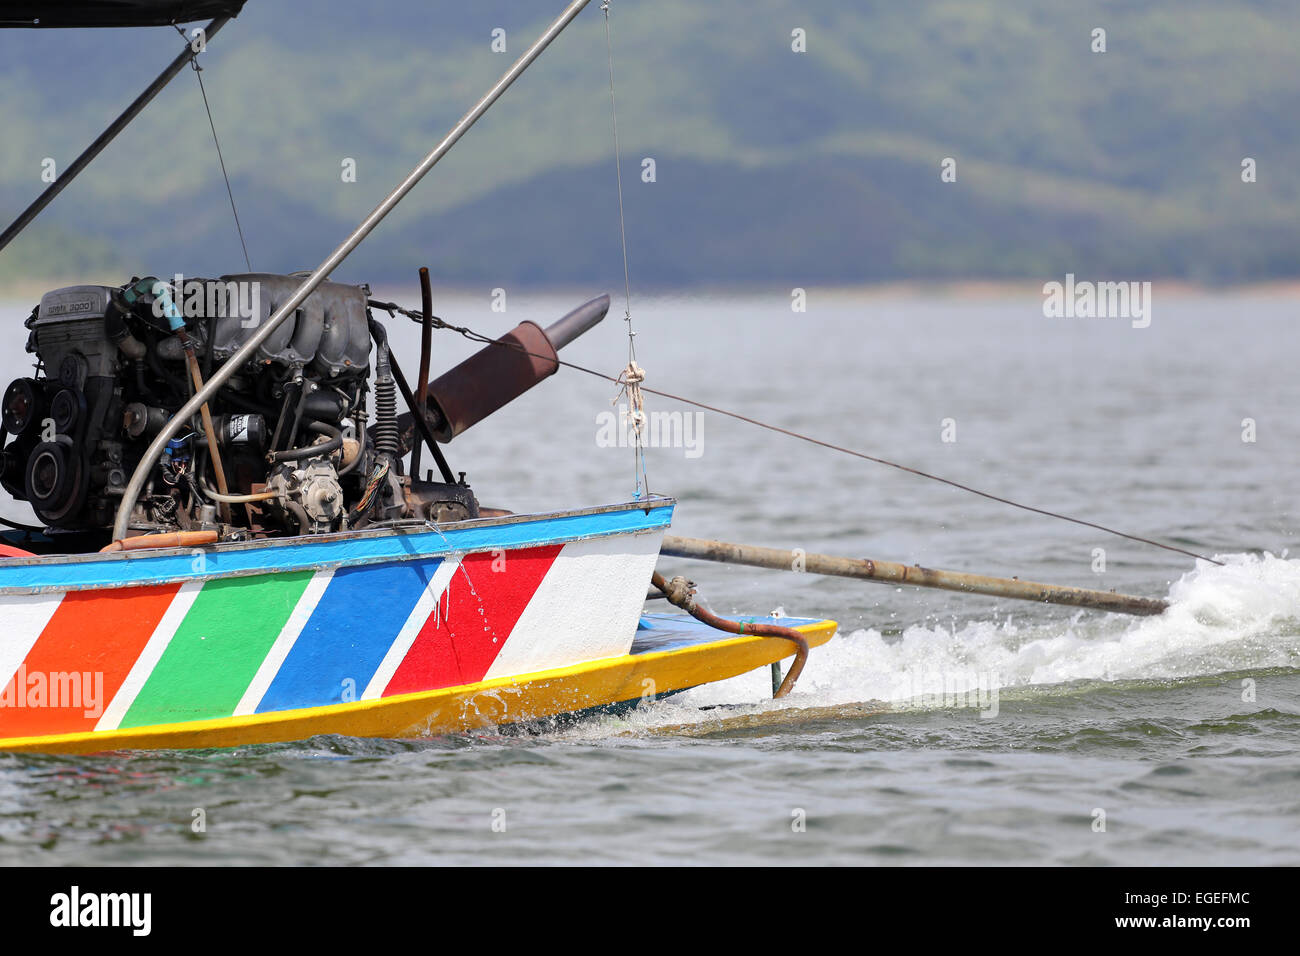 Outboard motor running on the local boat. Stock Photo